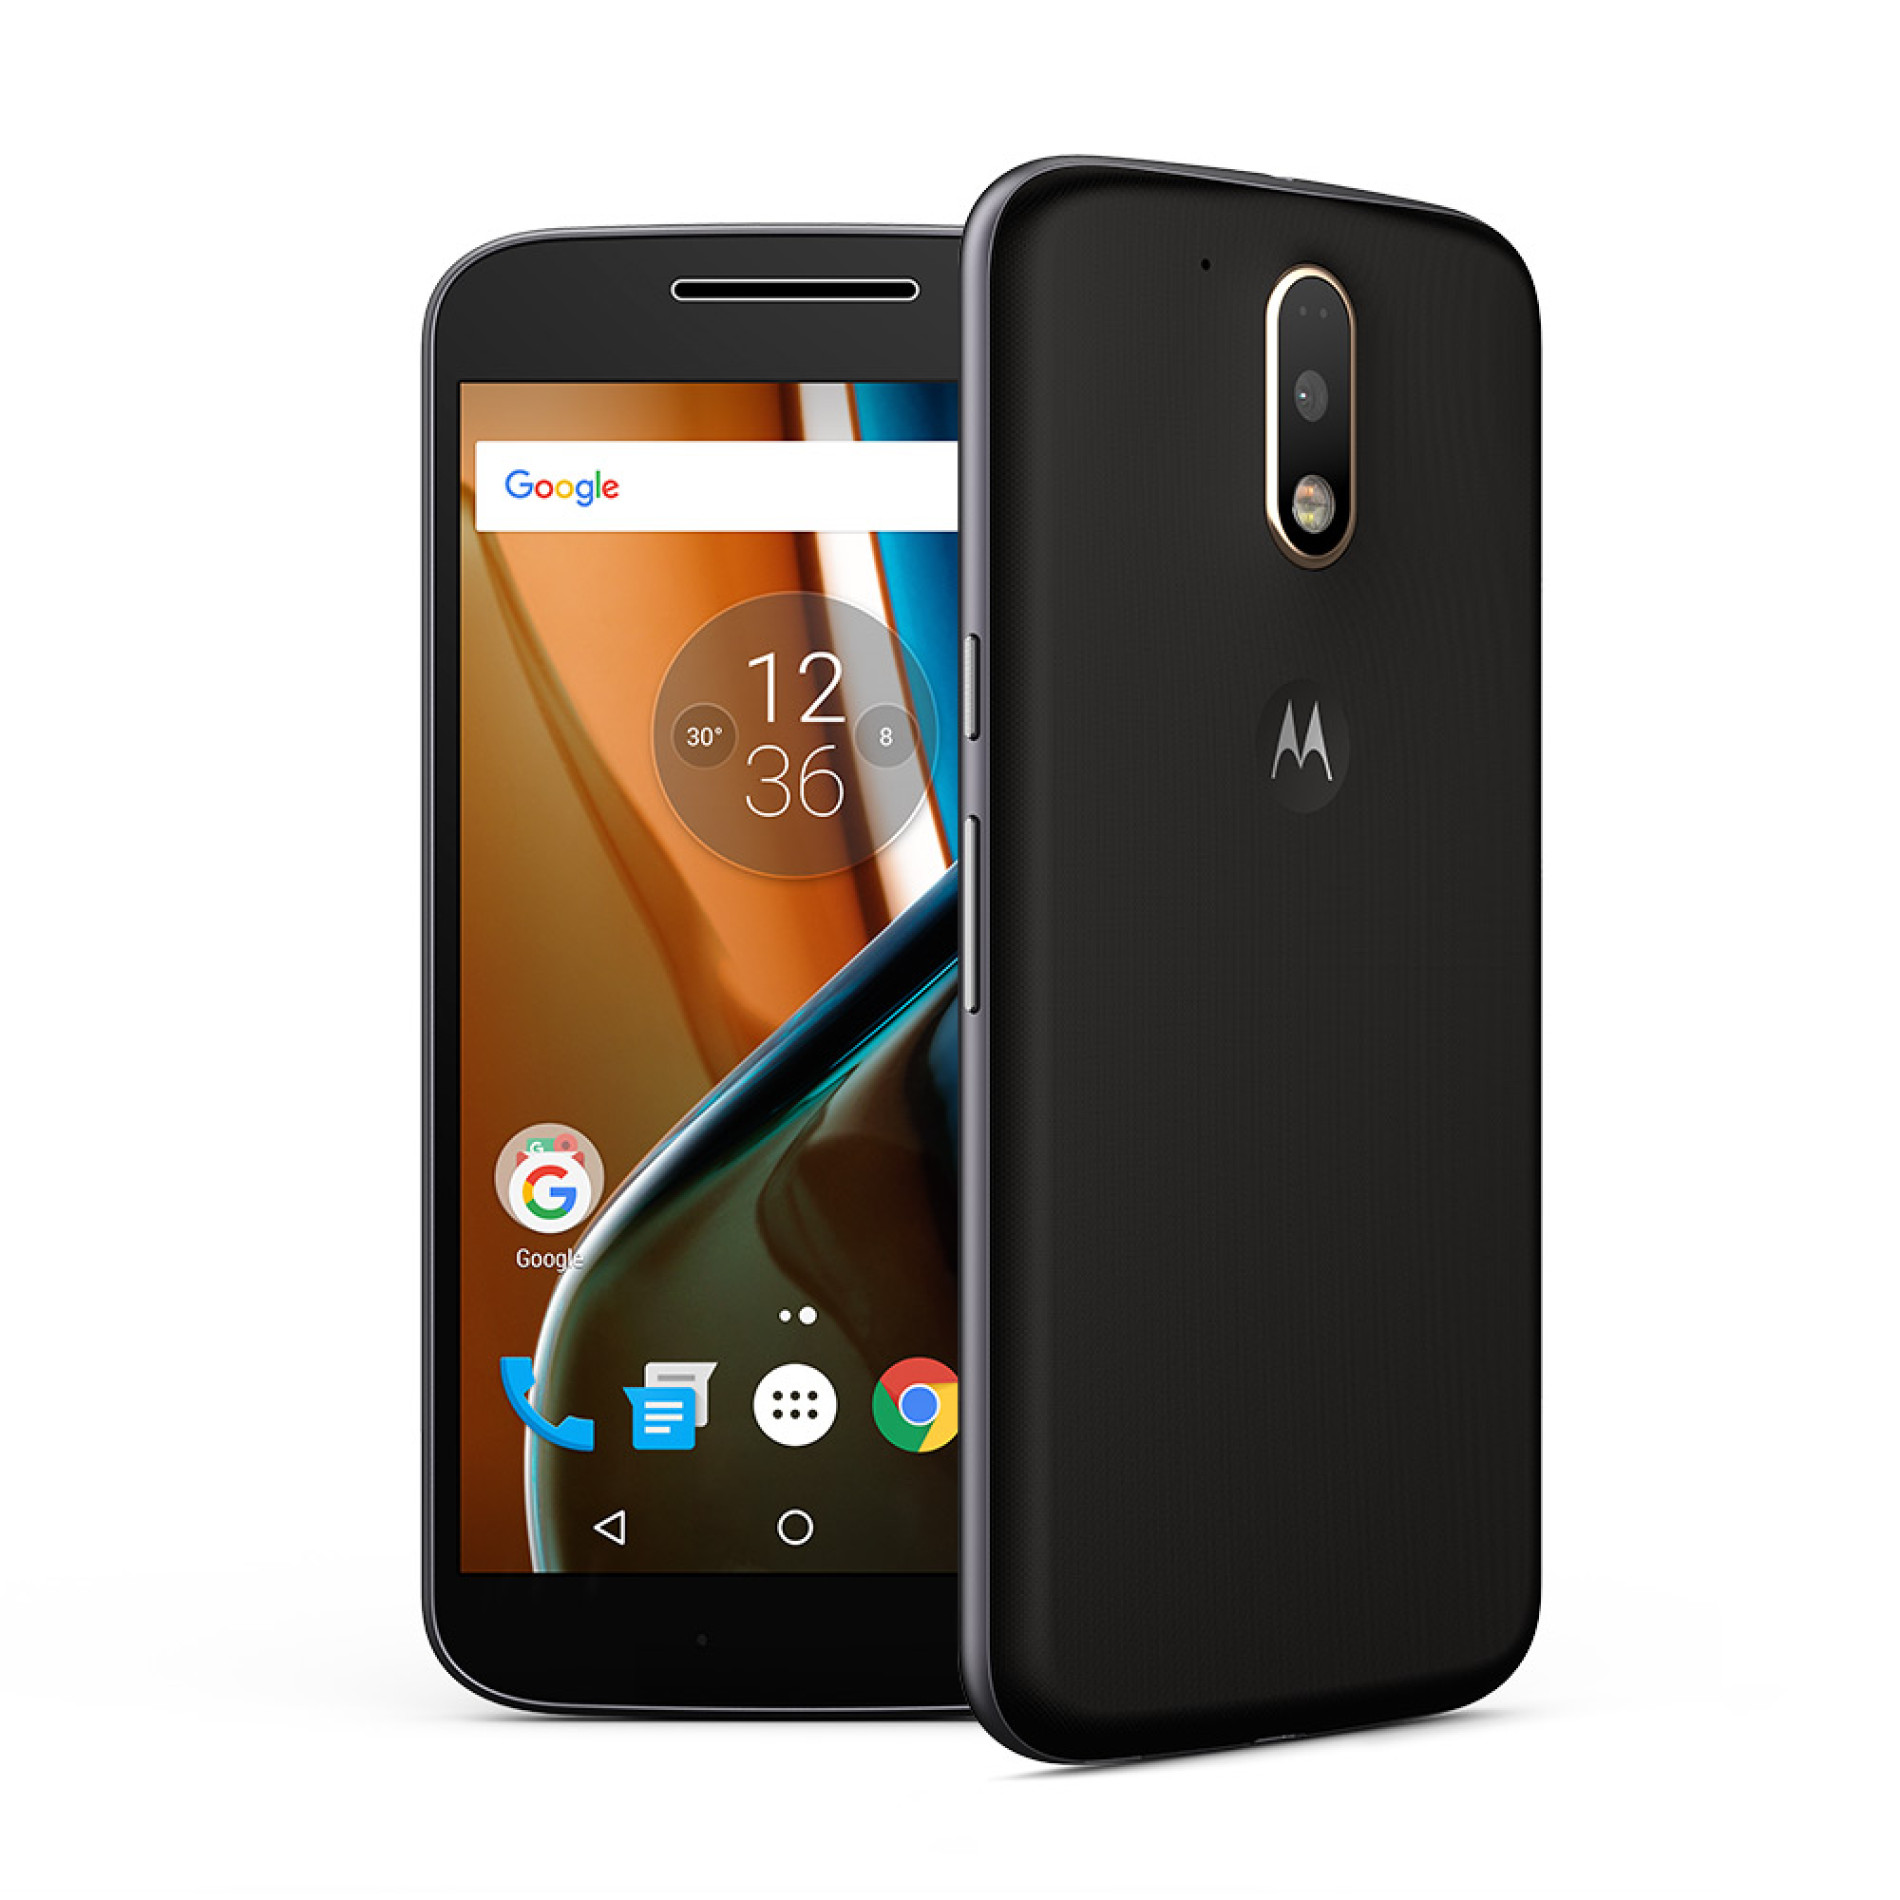 Moto G4 Plus review: From budget to mid-range